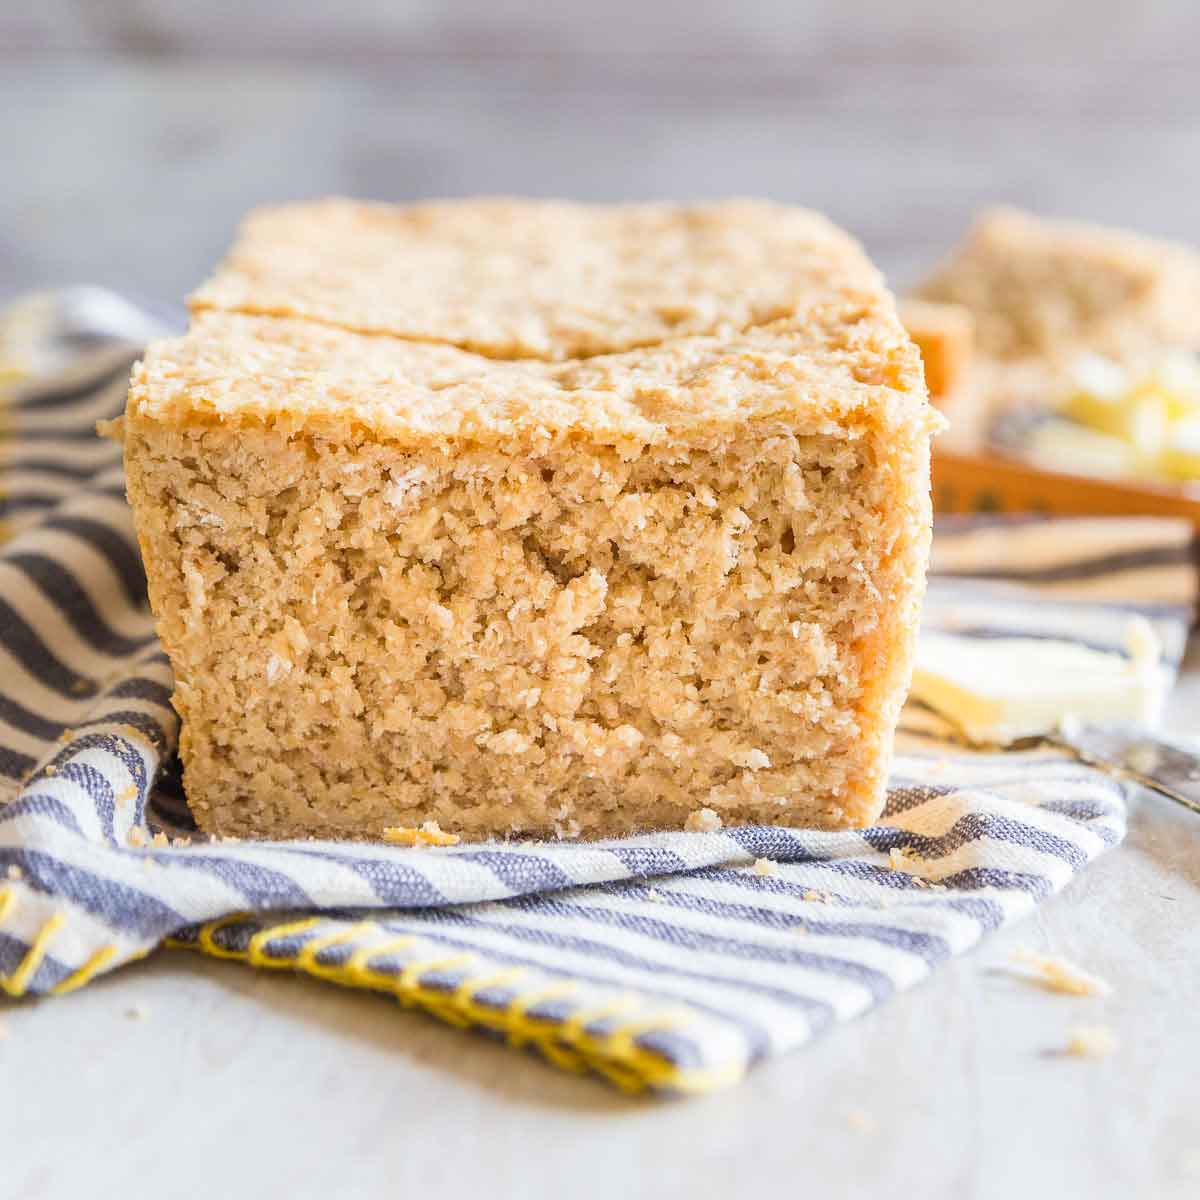 Follow this easy recipe for the best oat bread you can make at home.